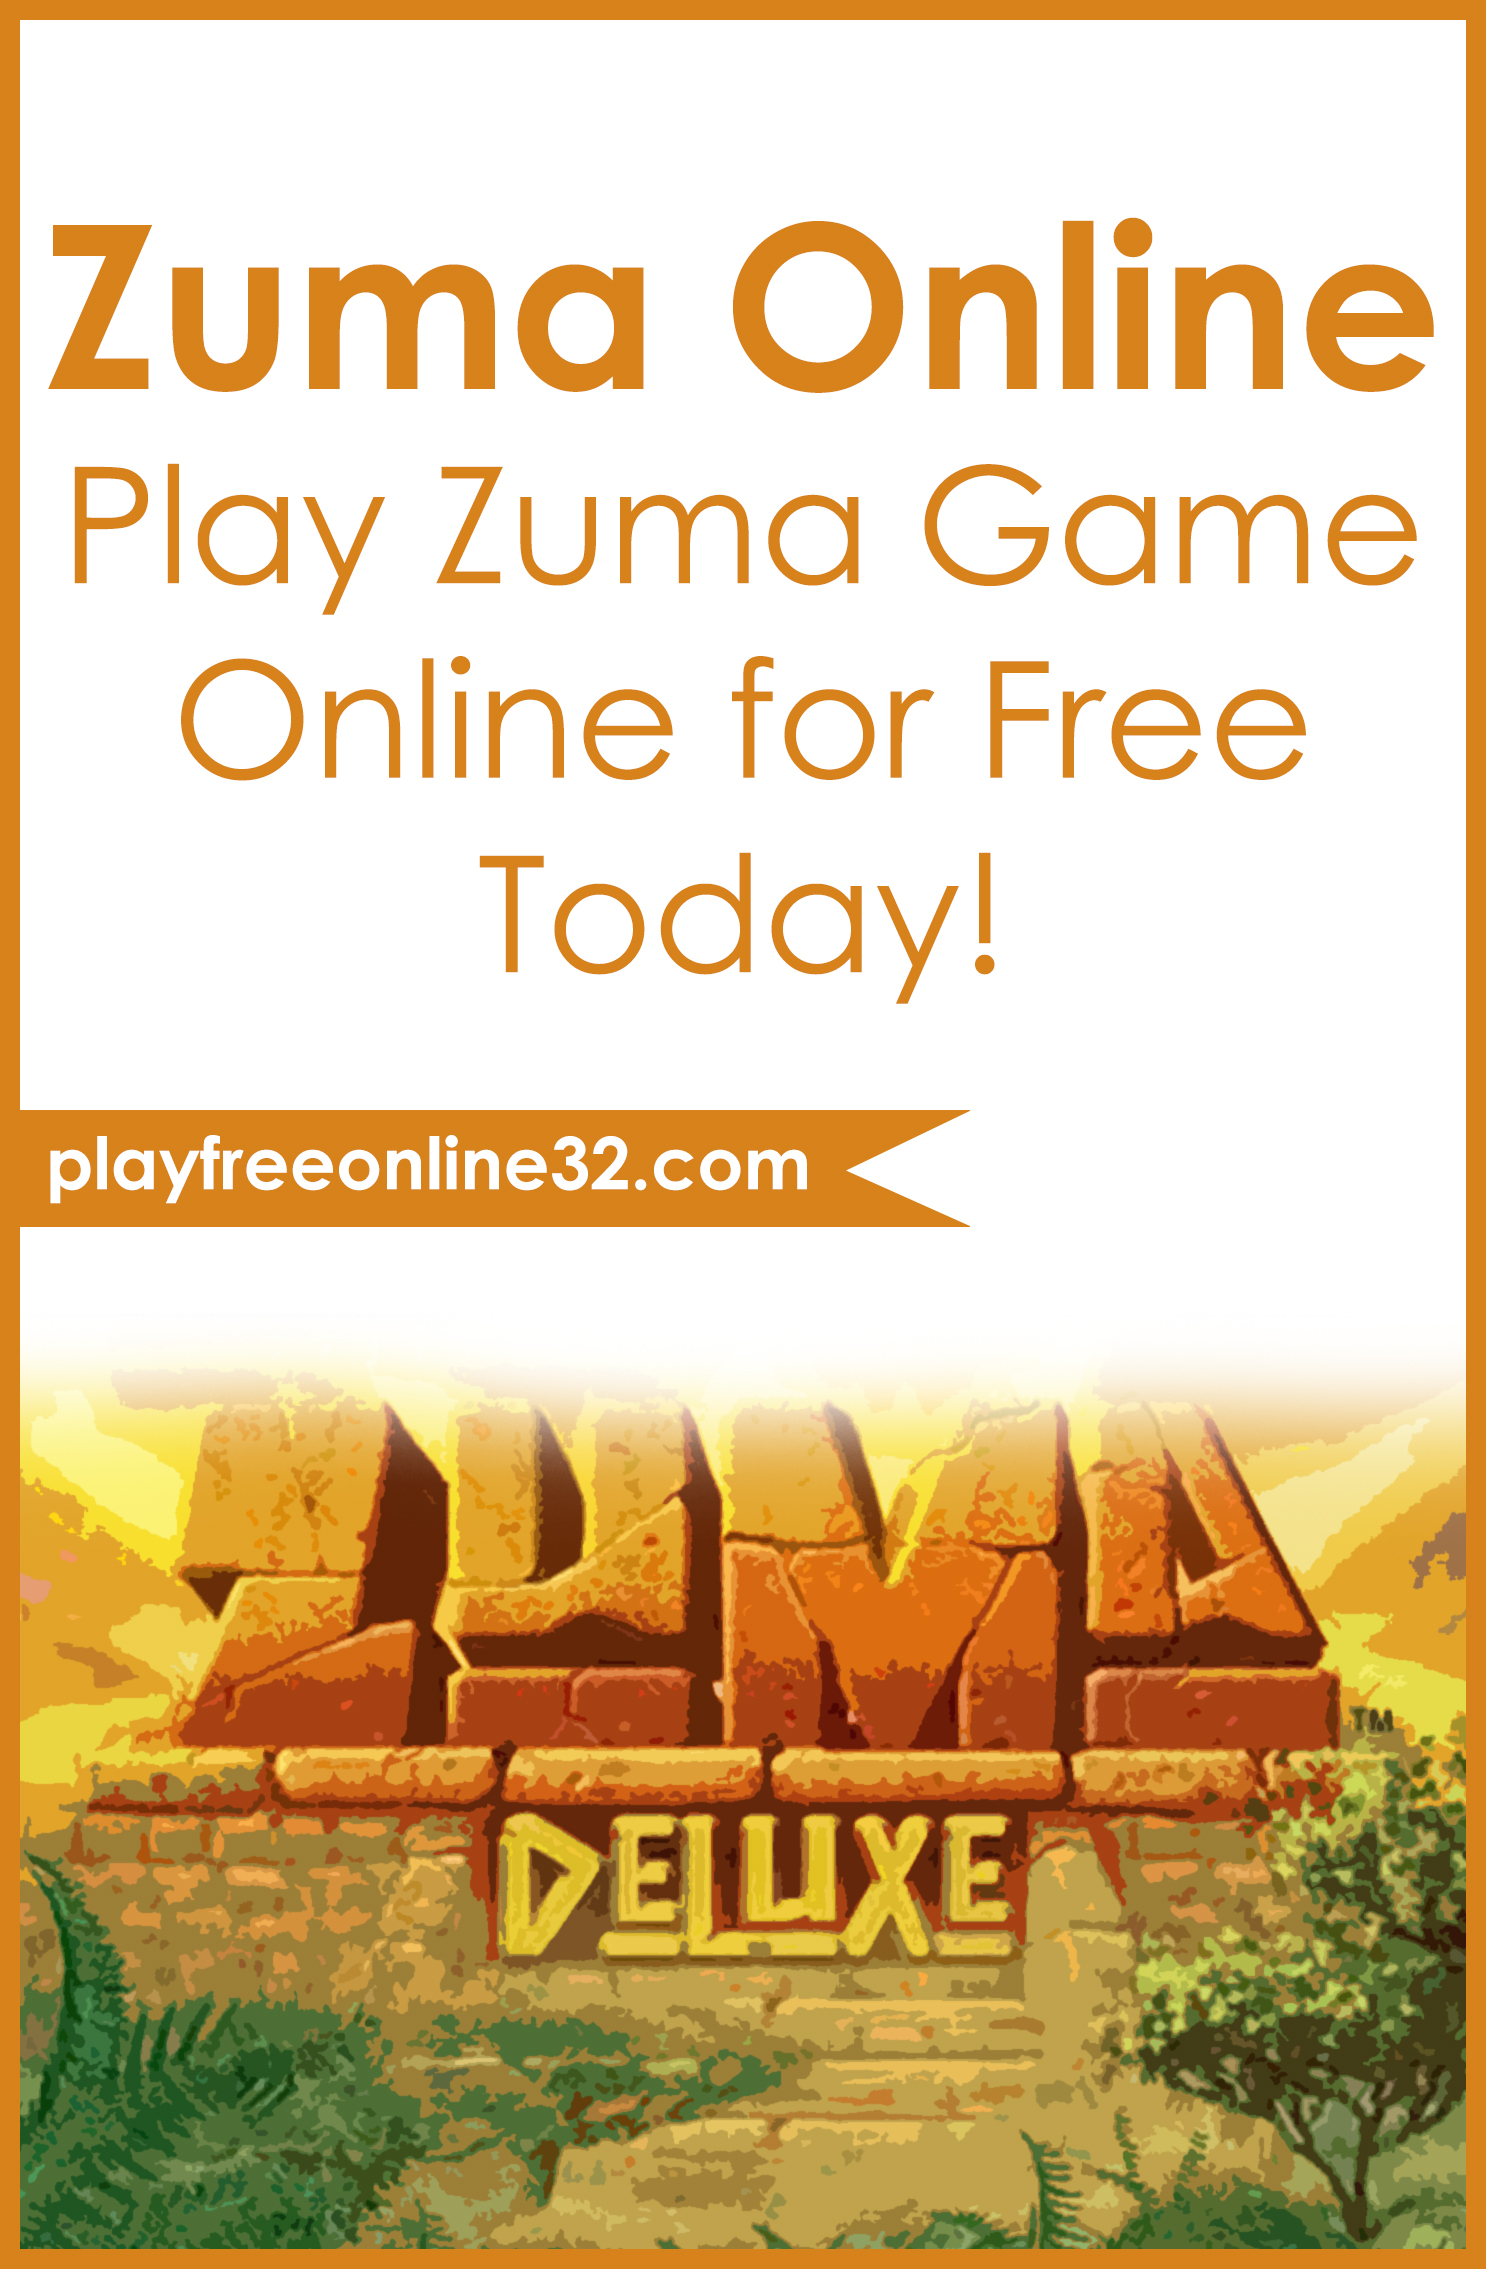 Zuma Online • Play Zuma Game Online for Free Today!